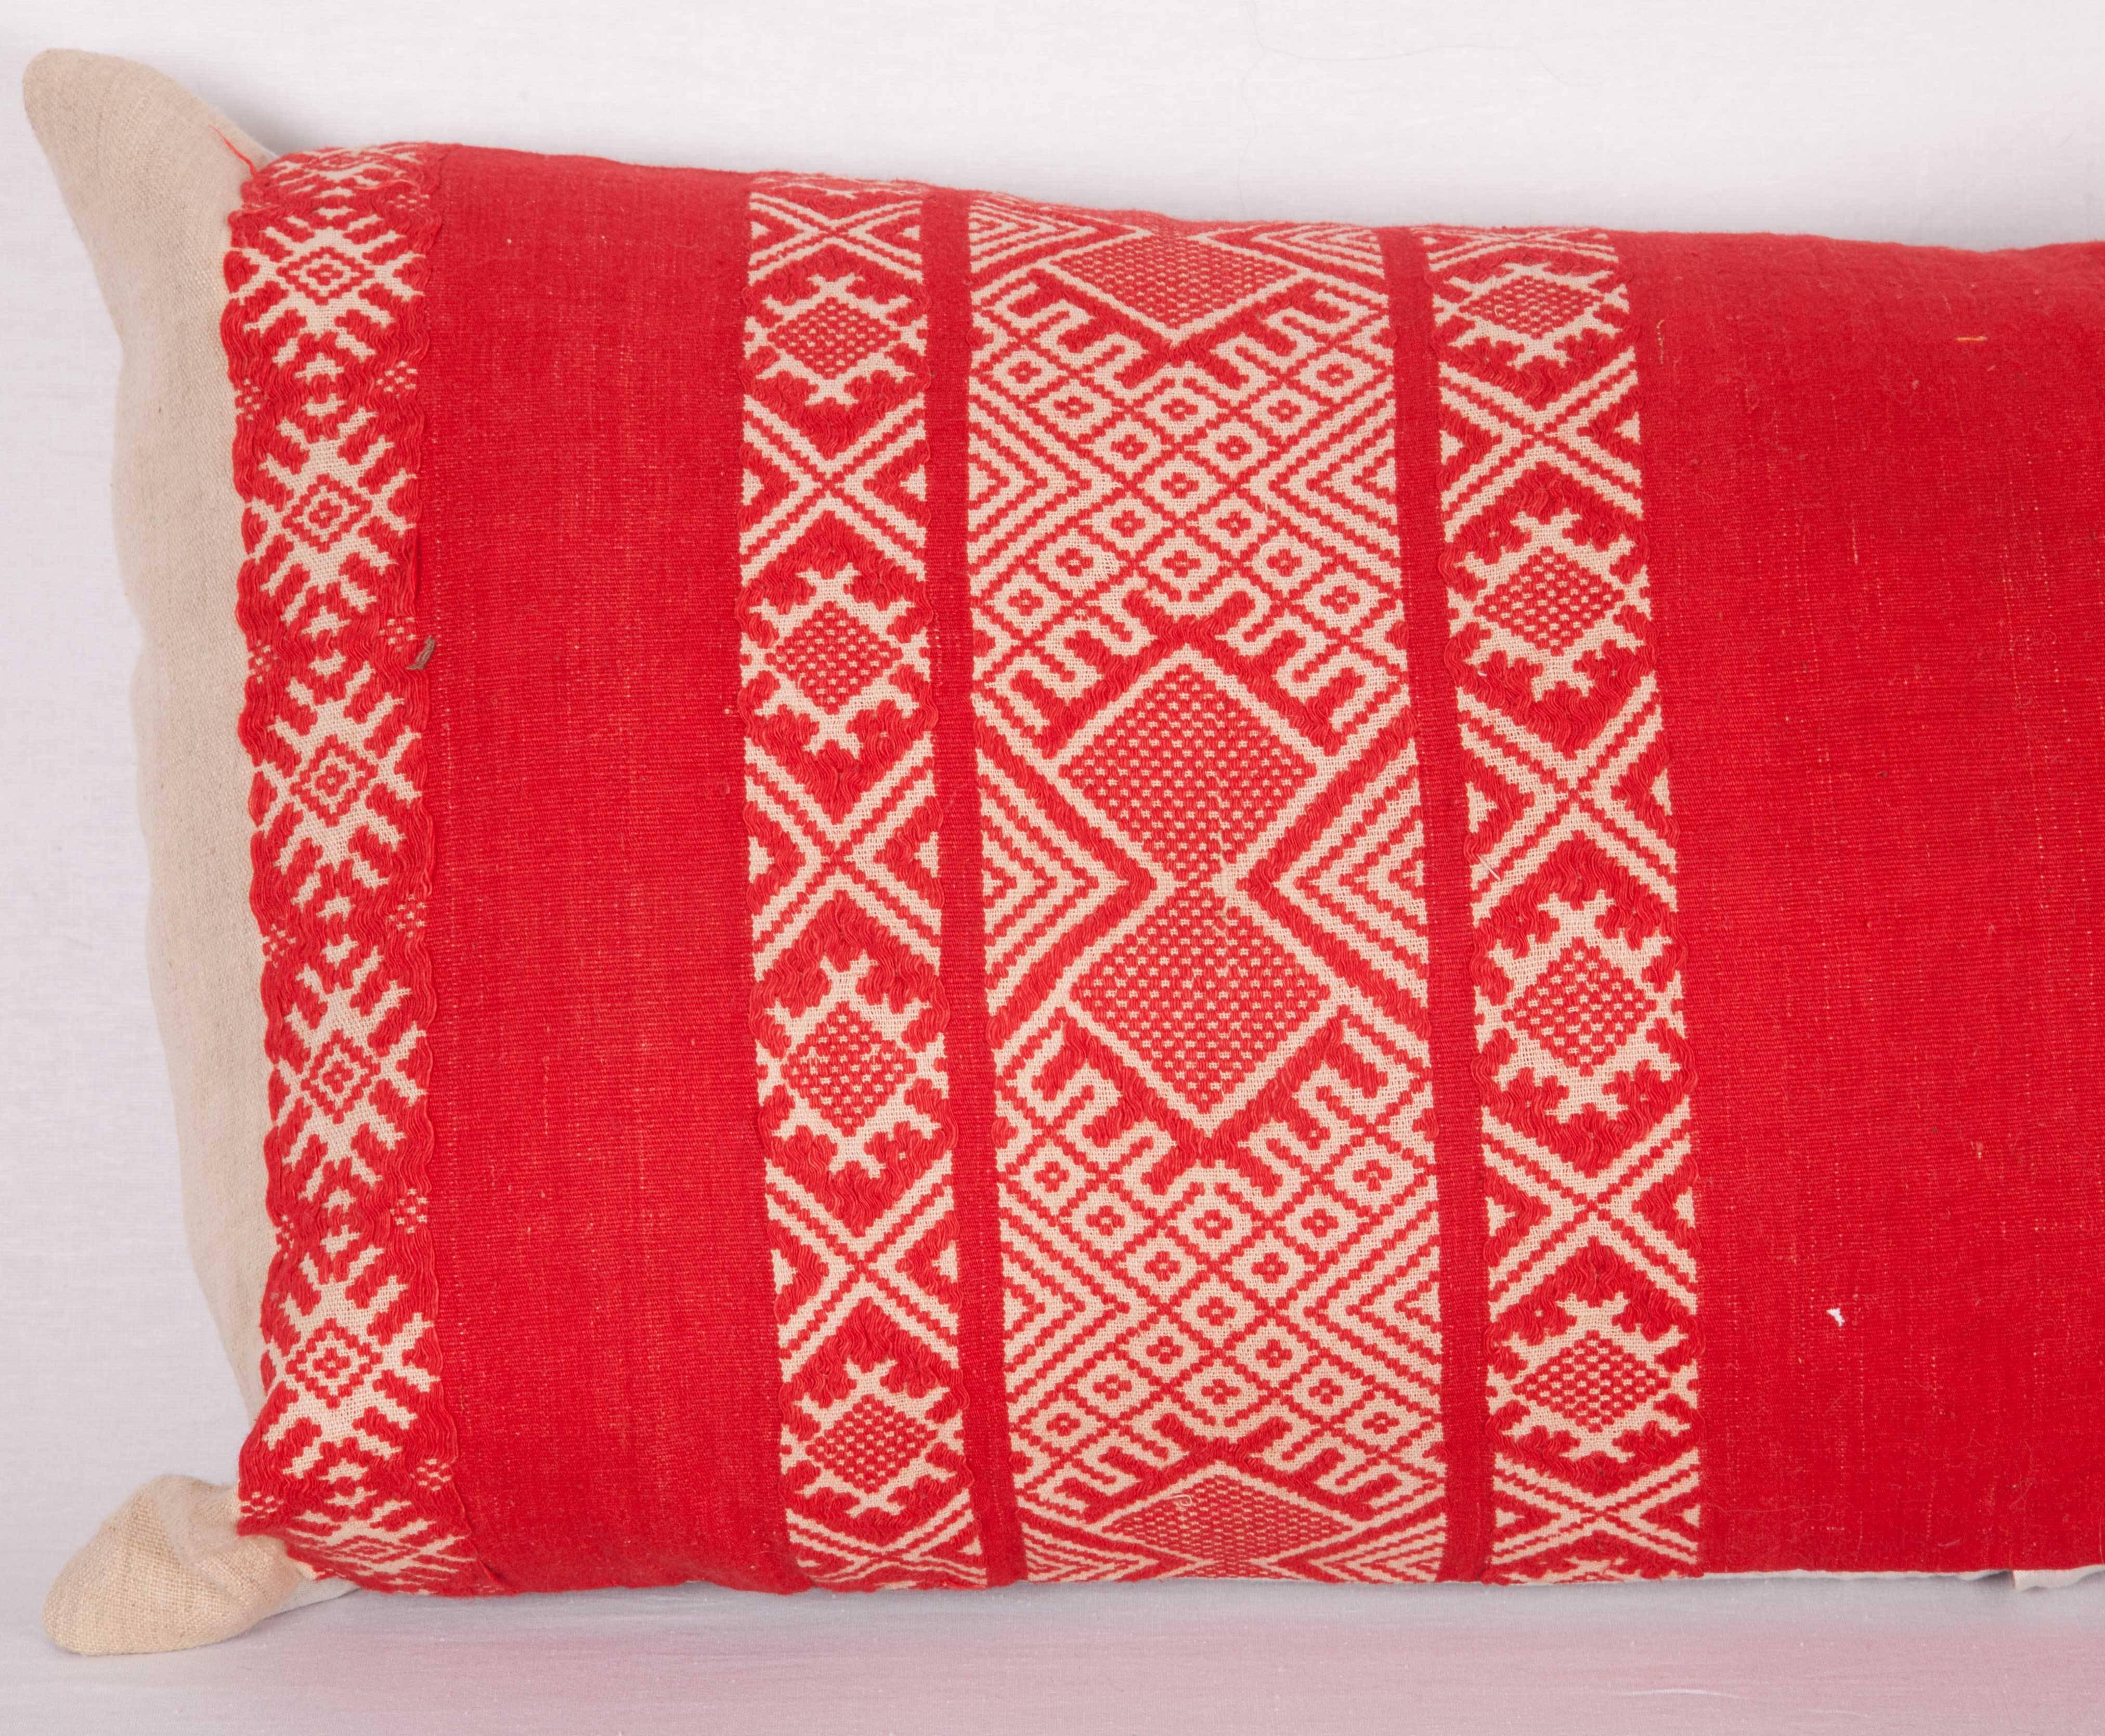 Cotton Pillowmade Out of an Early 20th Century Balkan Textile